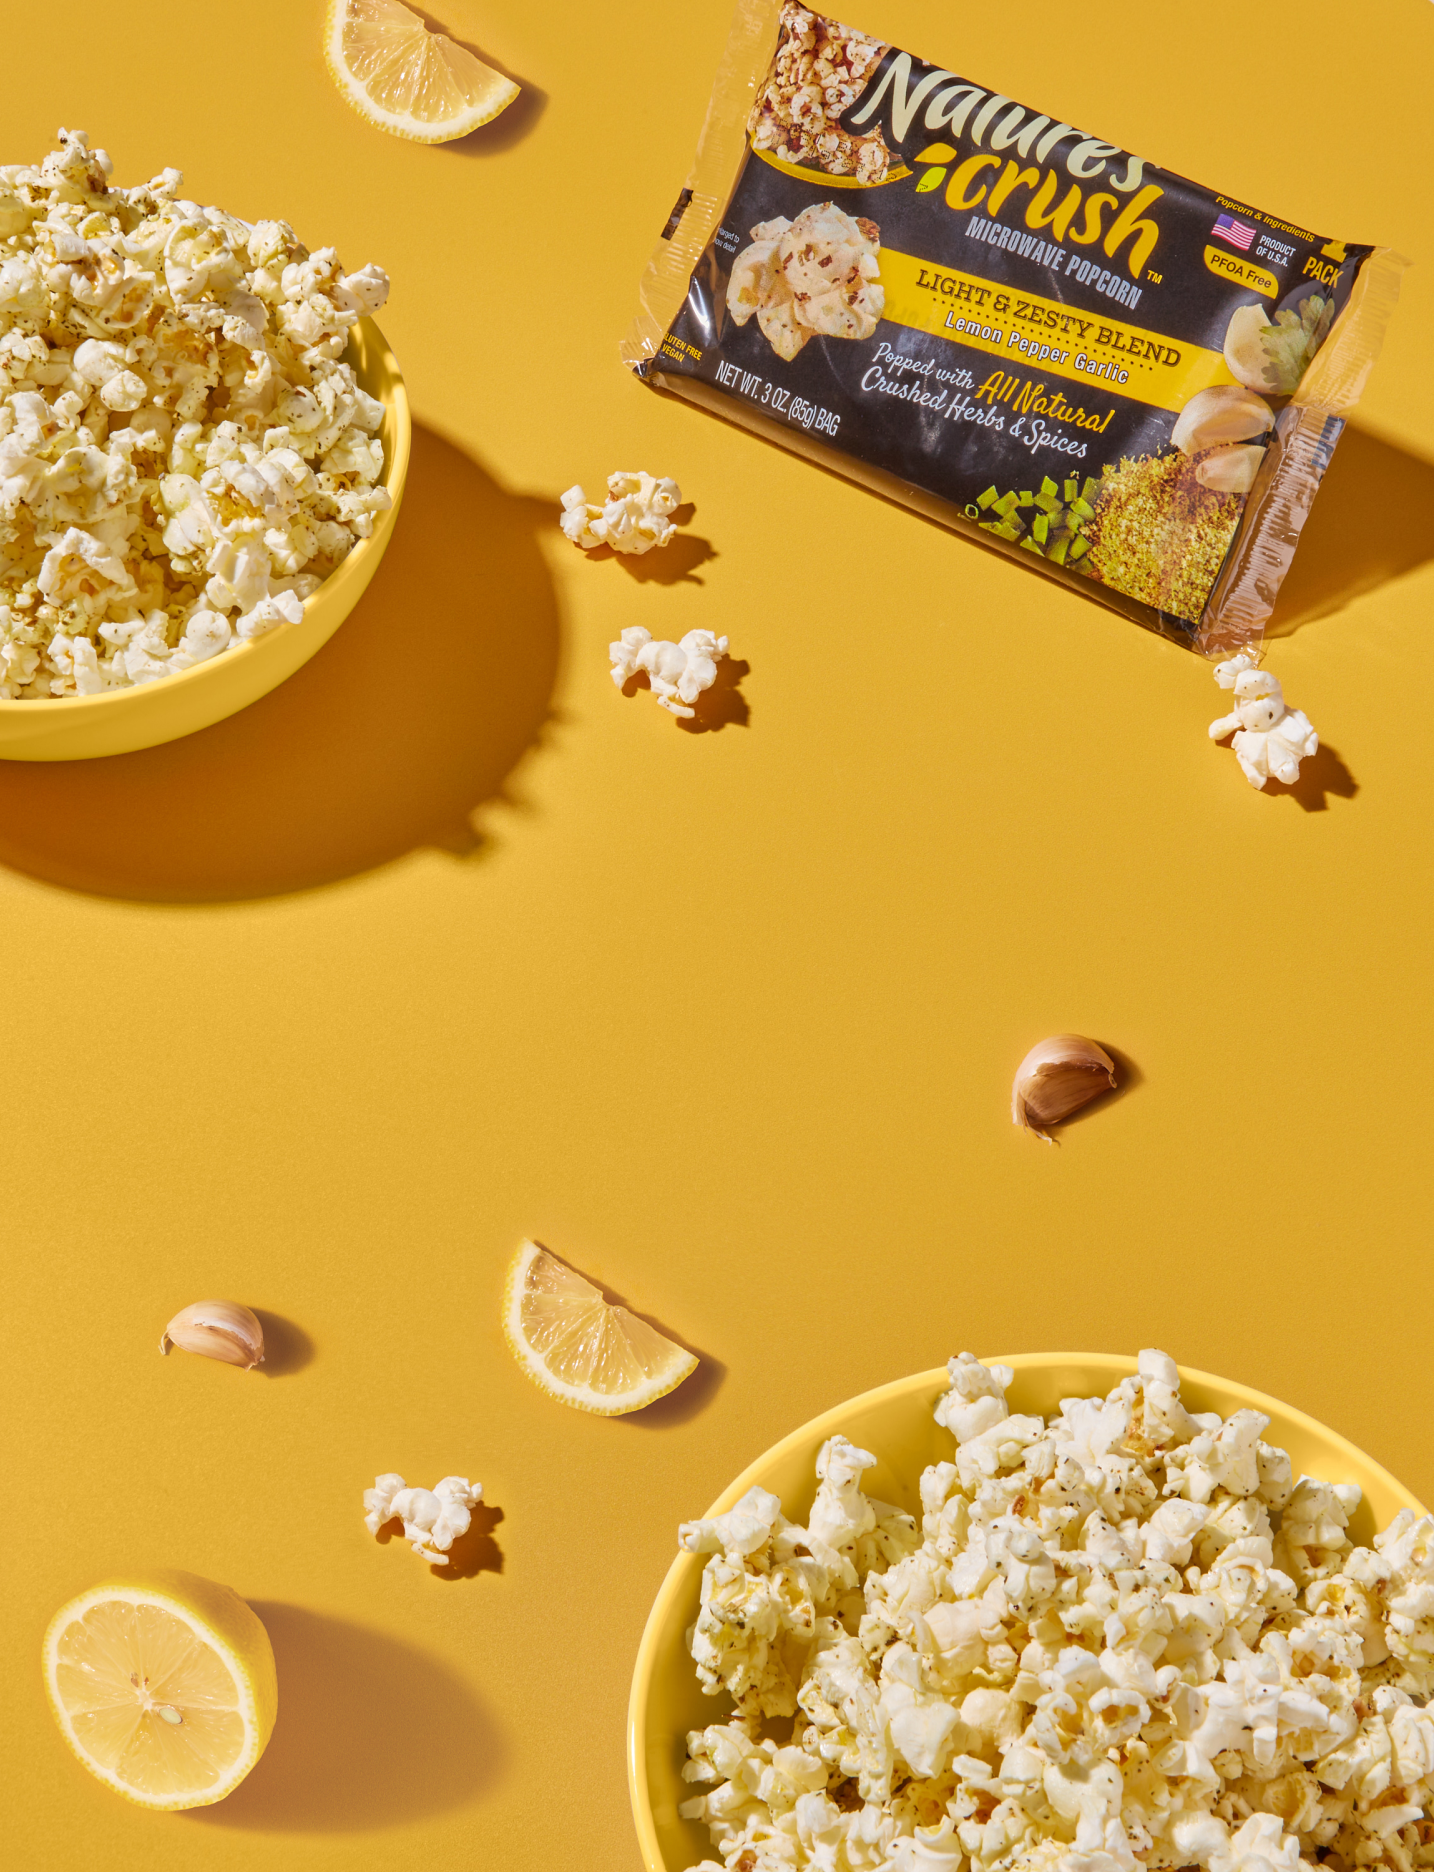 Bag and bowls of Light & Zesty popcorn surrounded by scattered popcorn, lemons and garlic on yellow surface.